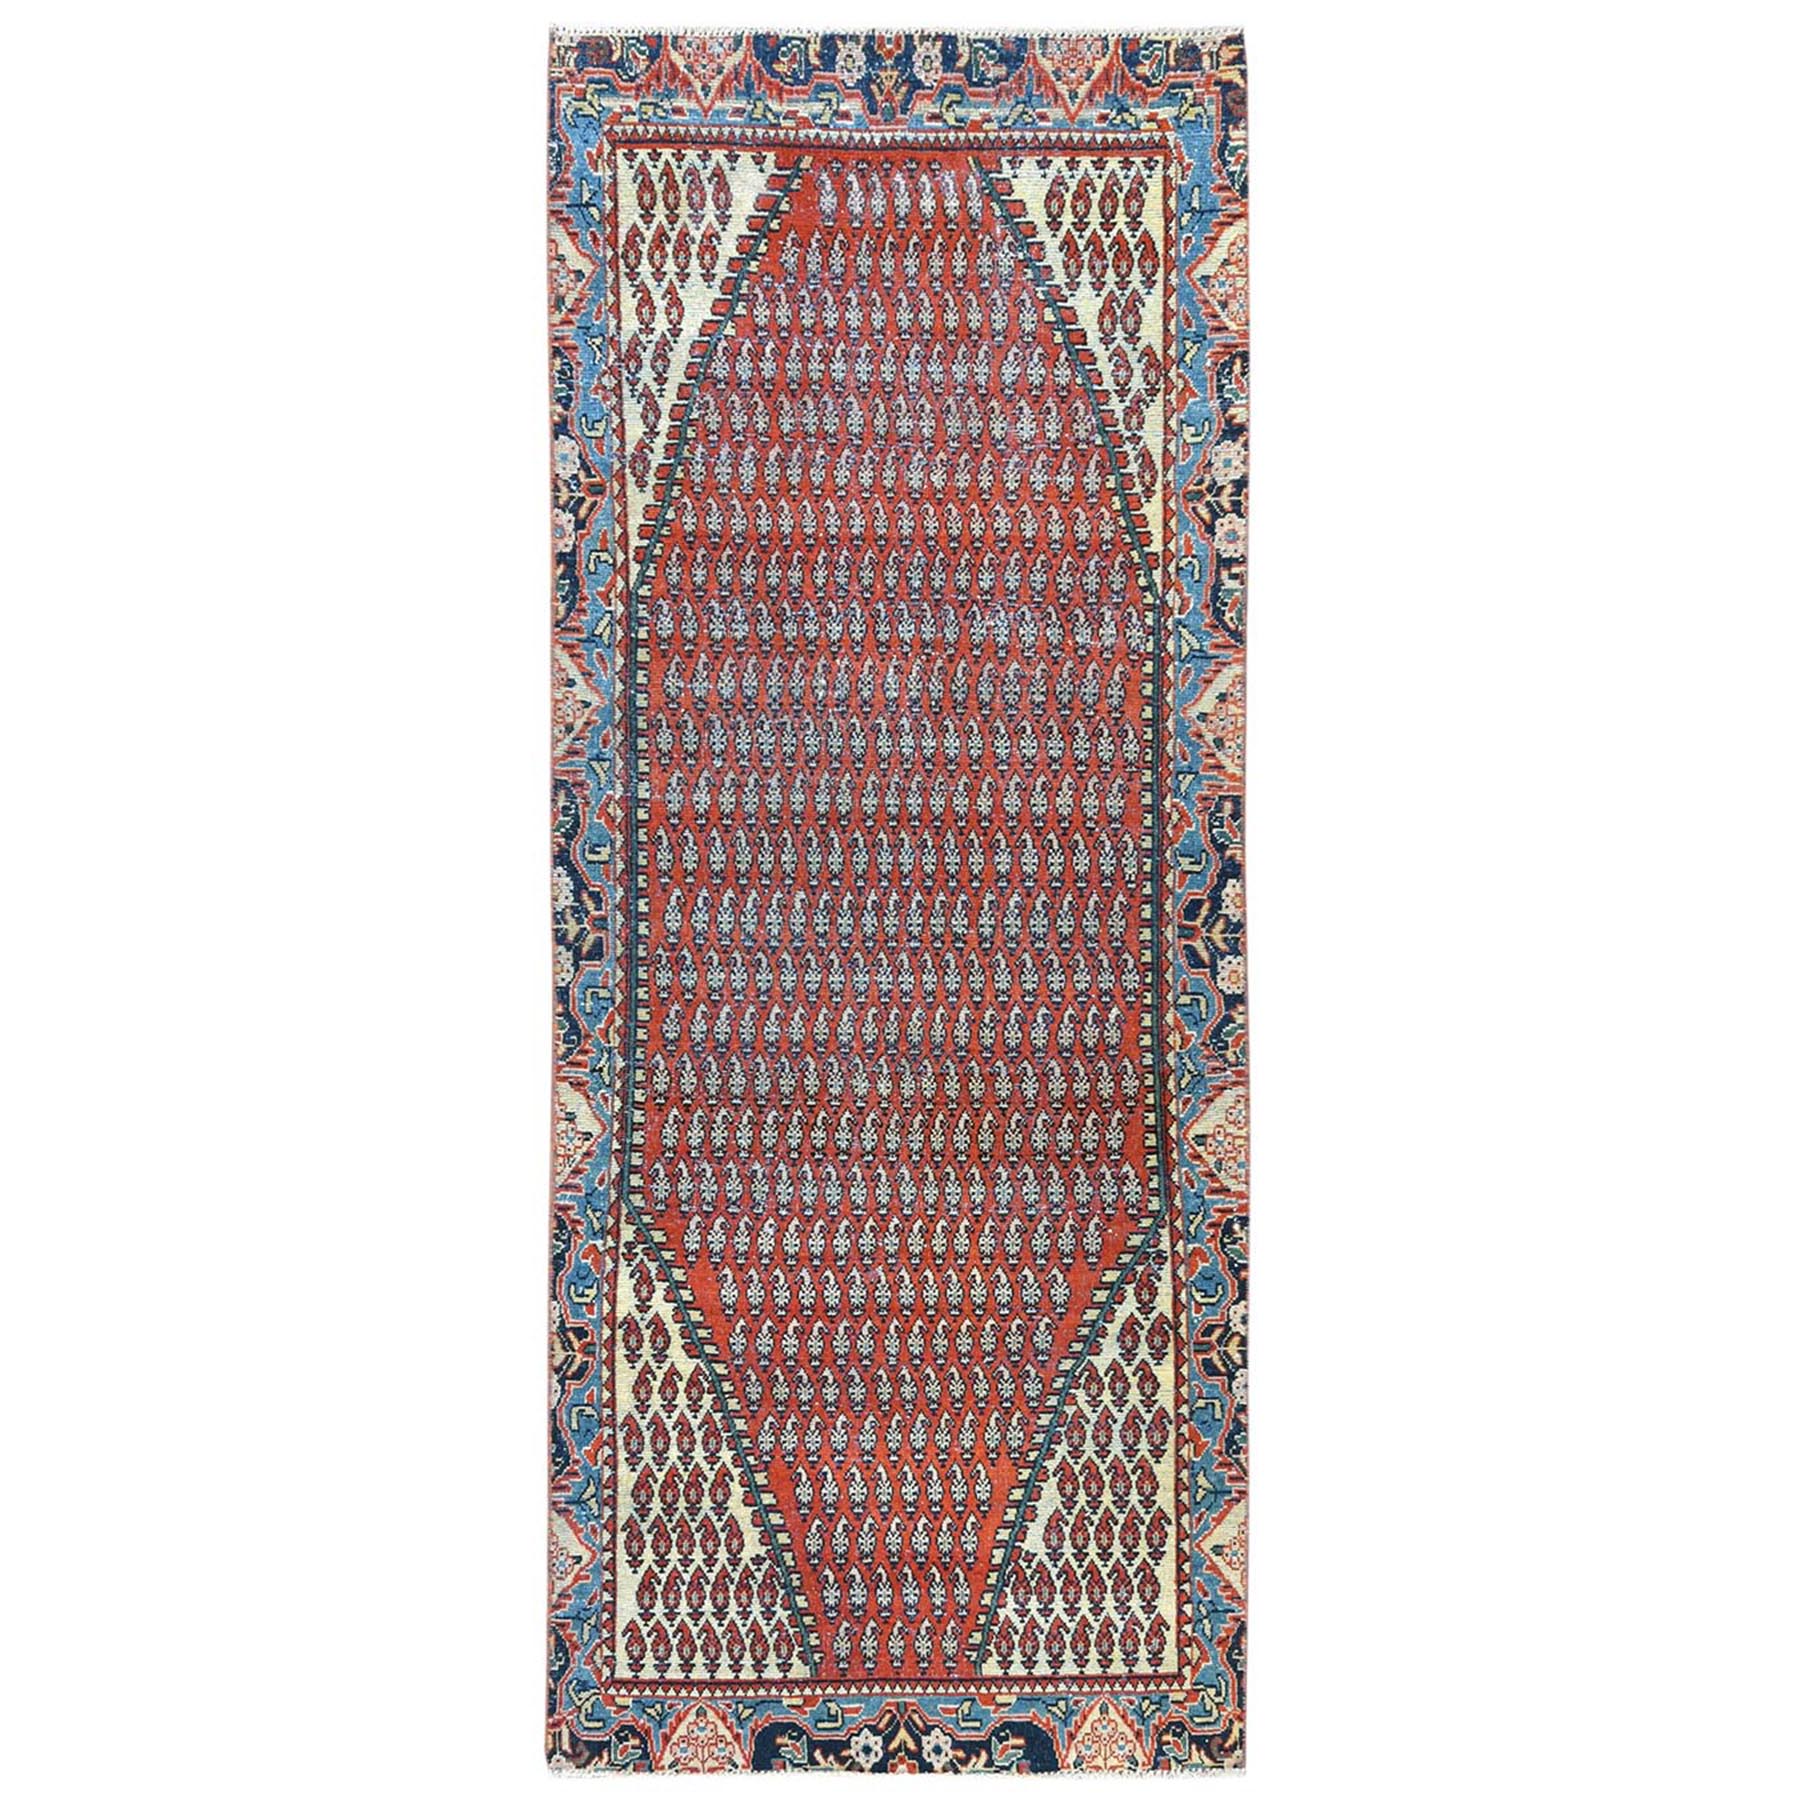 3'7"x9'3" Tomato Red, Pure Wool, Vintage Persian Serab with Small Repetitive Boteh Design, Hand Woven, Worn Down, Distressed Look, Wide Runner Oriental Rug 